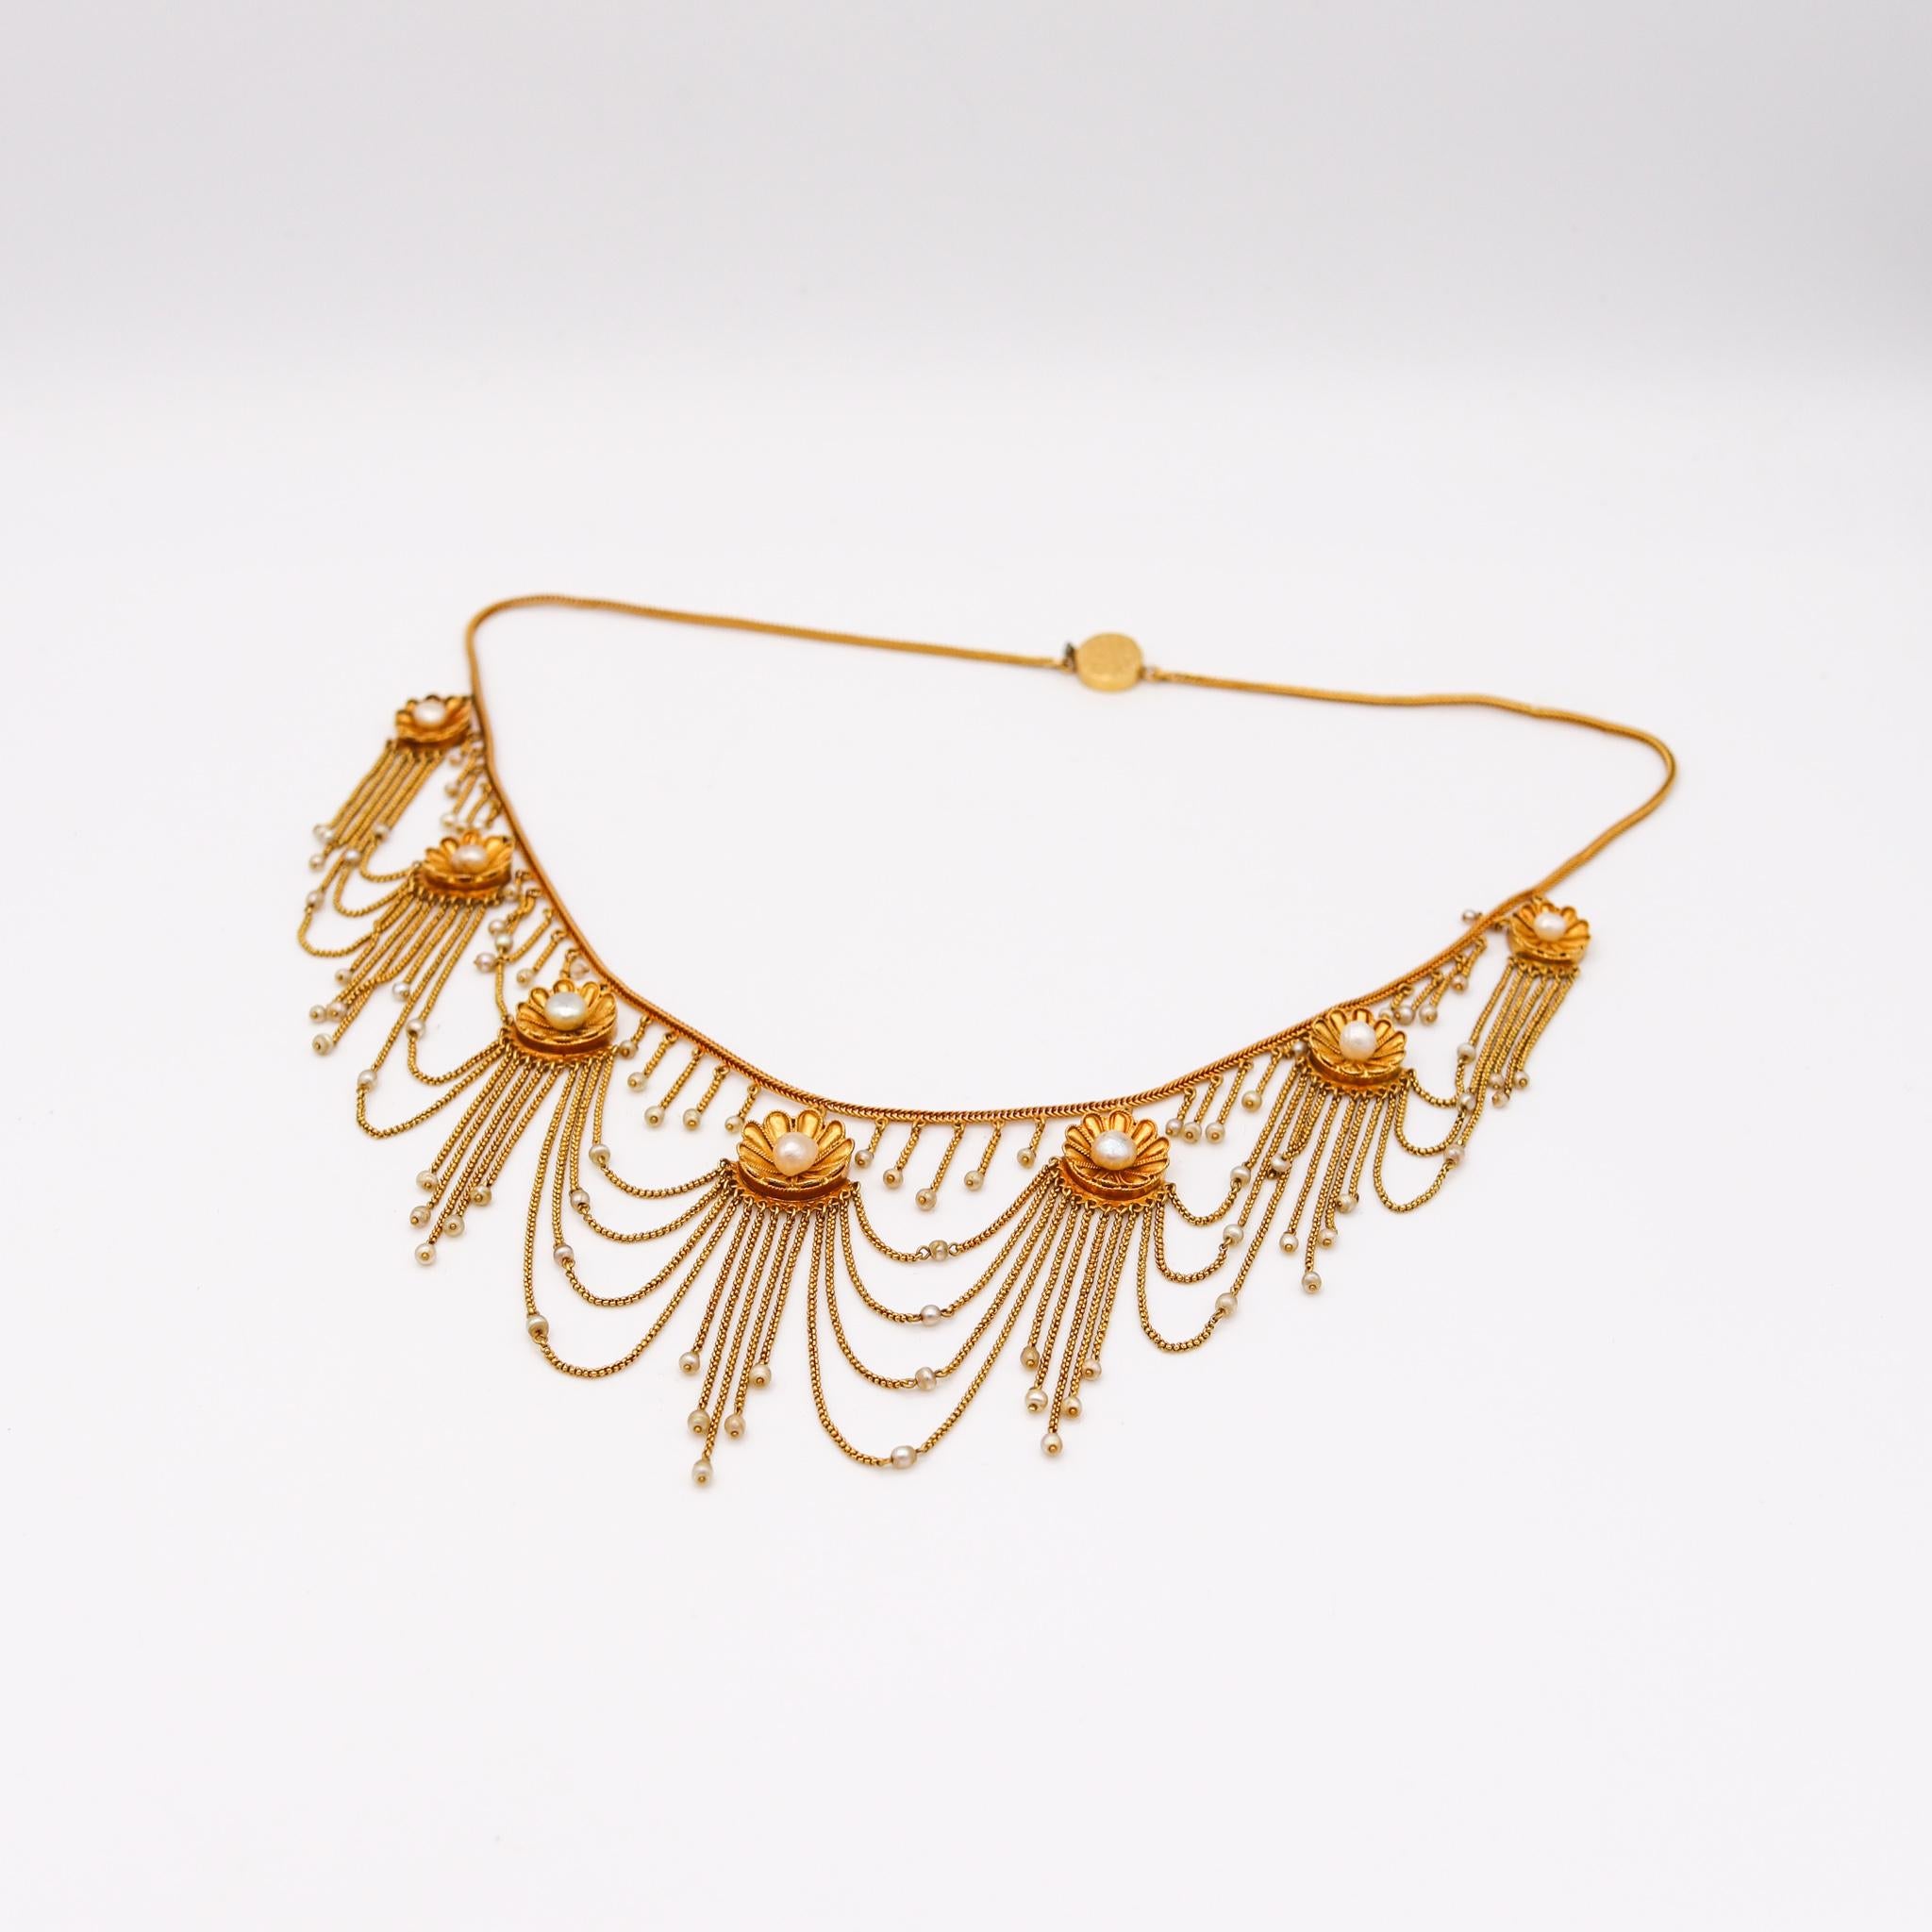 Victorian 1870 Gorgeous Festoon Fringe Necklace 18Kt Yellow Gold Natural Pearls In Excellent Condition For Sale In Miami, FL